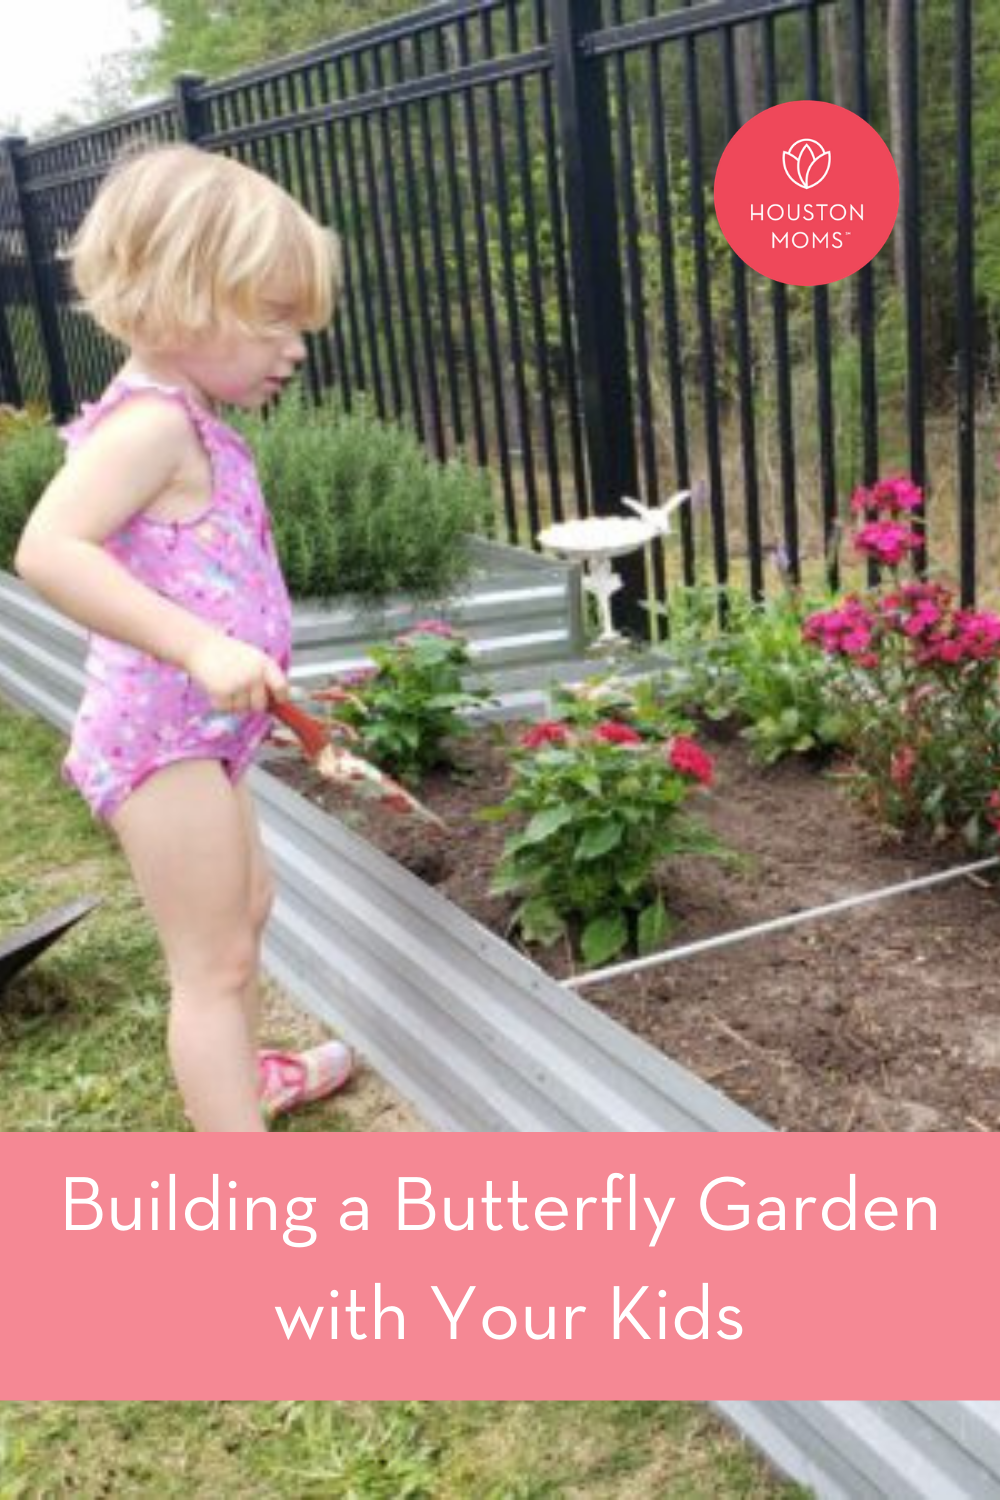 Houston Moms "Building a Butterfly Garden with Your Kids" #houstonmoms #momsaroundhouston